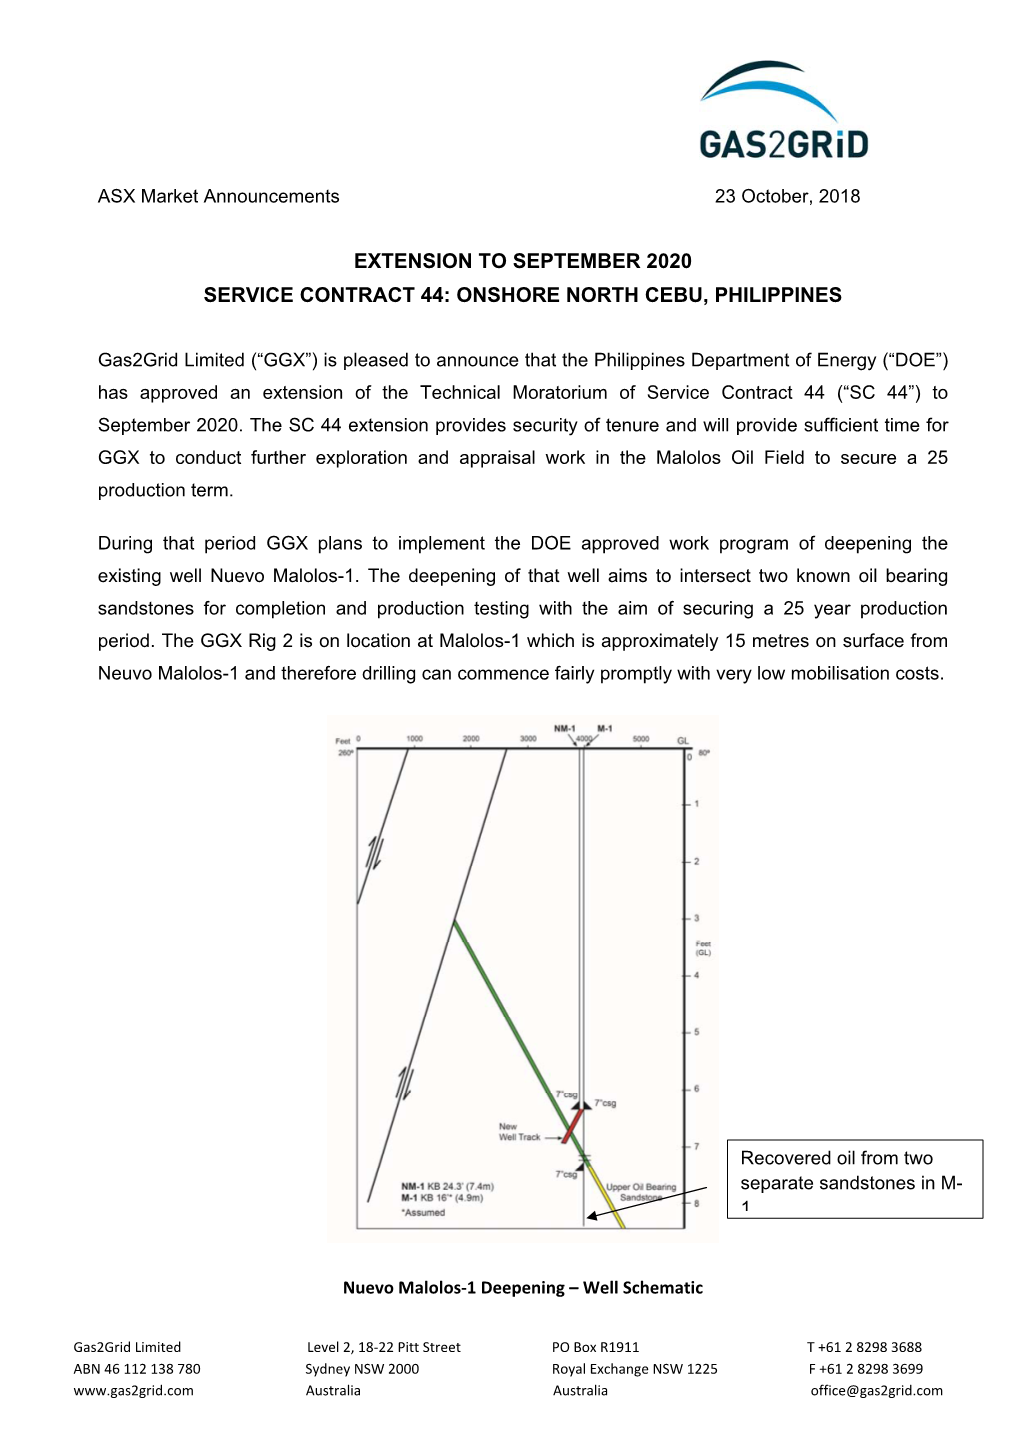 Extension to September 2020 Service Contract 44: Onshore North Cebu, Philippines